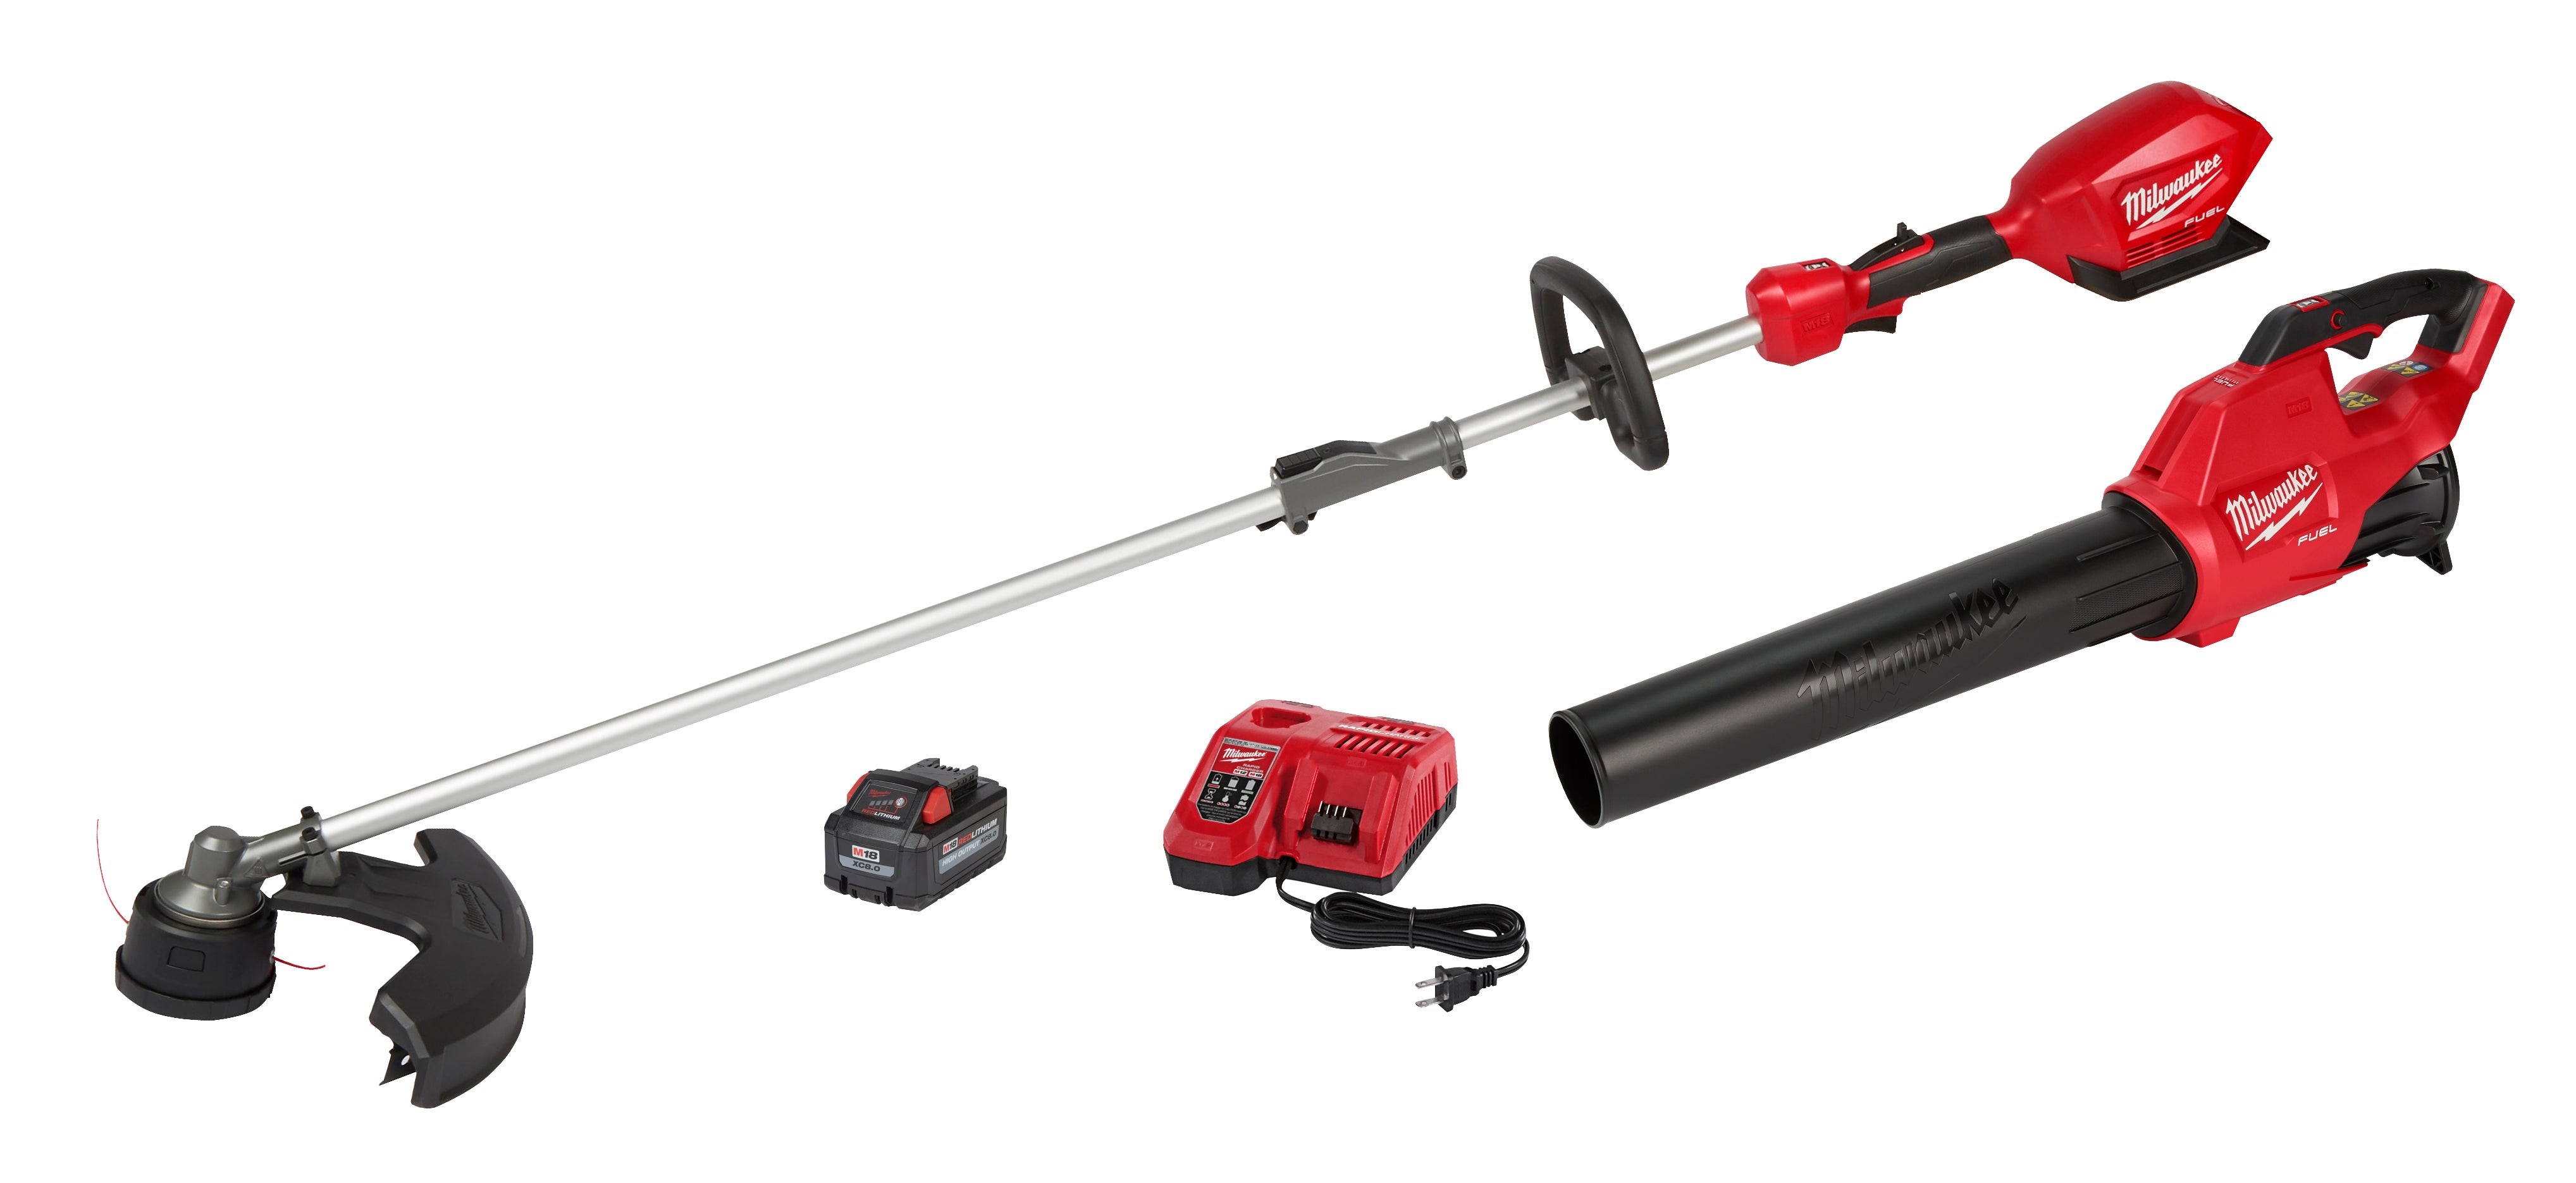 M18 Fuel String Trimmer & Blower Combo Kit